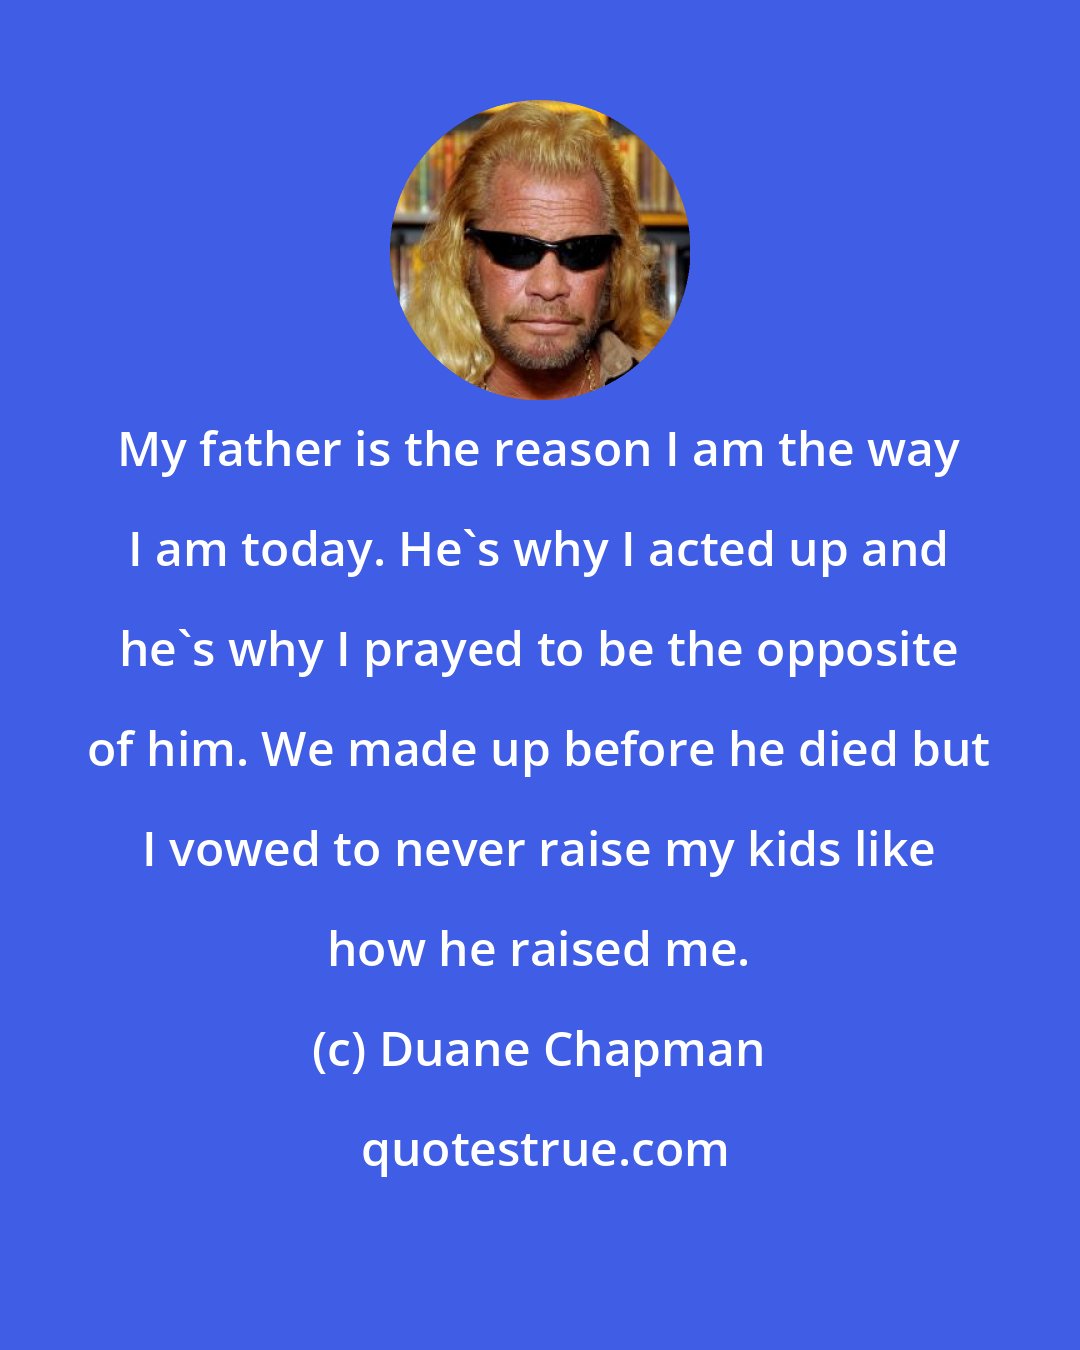 Duane Chapman: My father is the reason I am the way I am today. He's why I acted up and he's why I prayed to be the opposite of him. We made up before he died but I vowed to never raise my kids like how he raised me.